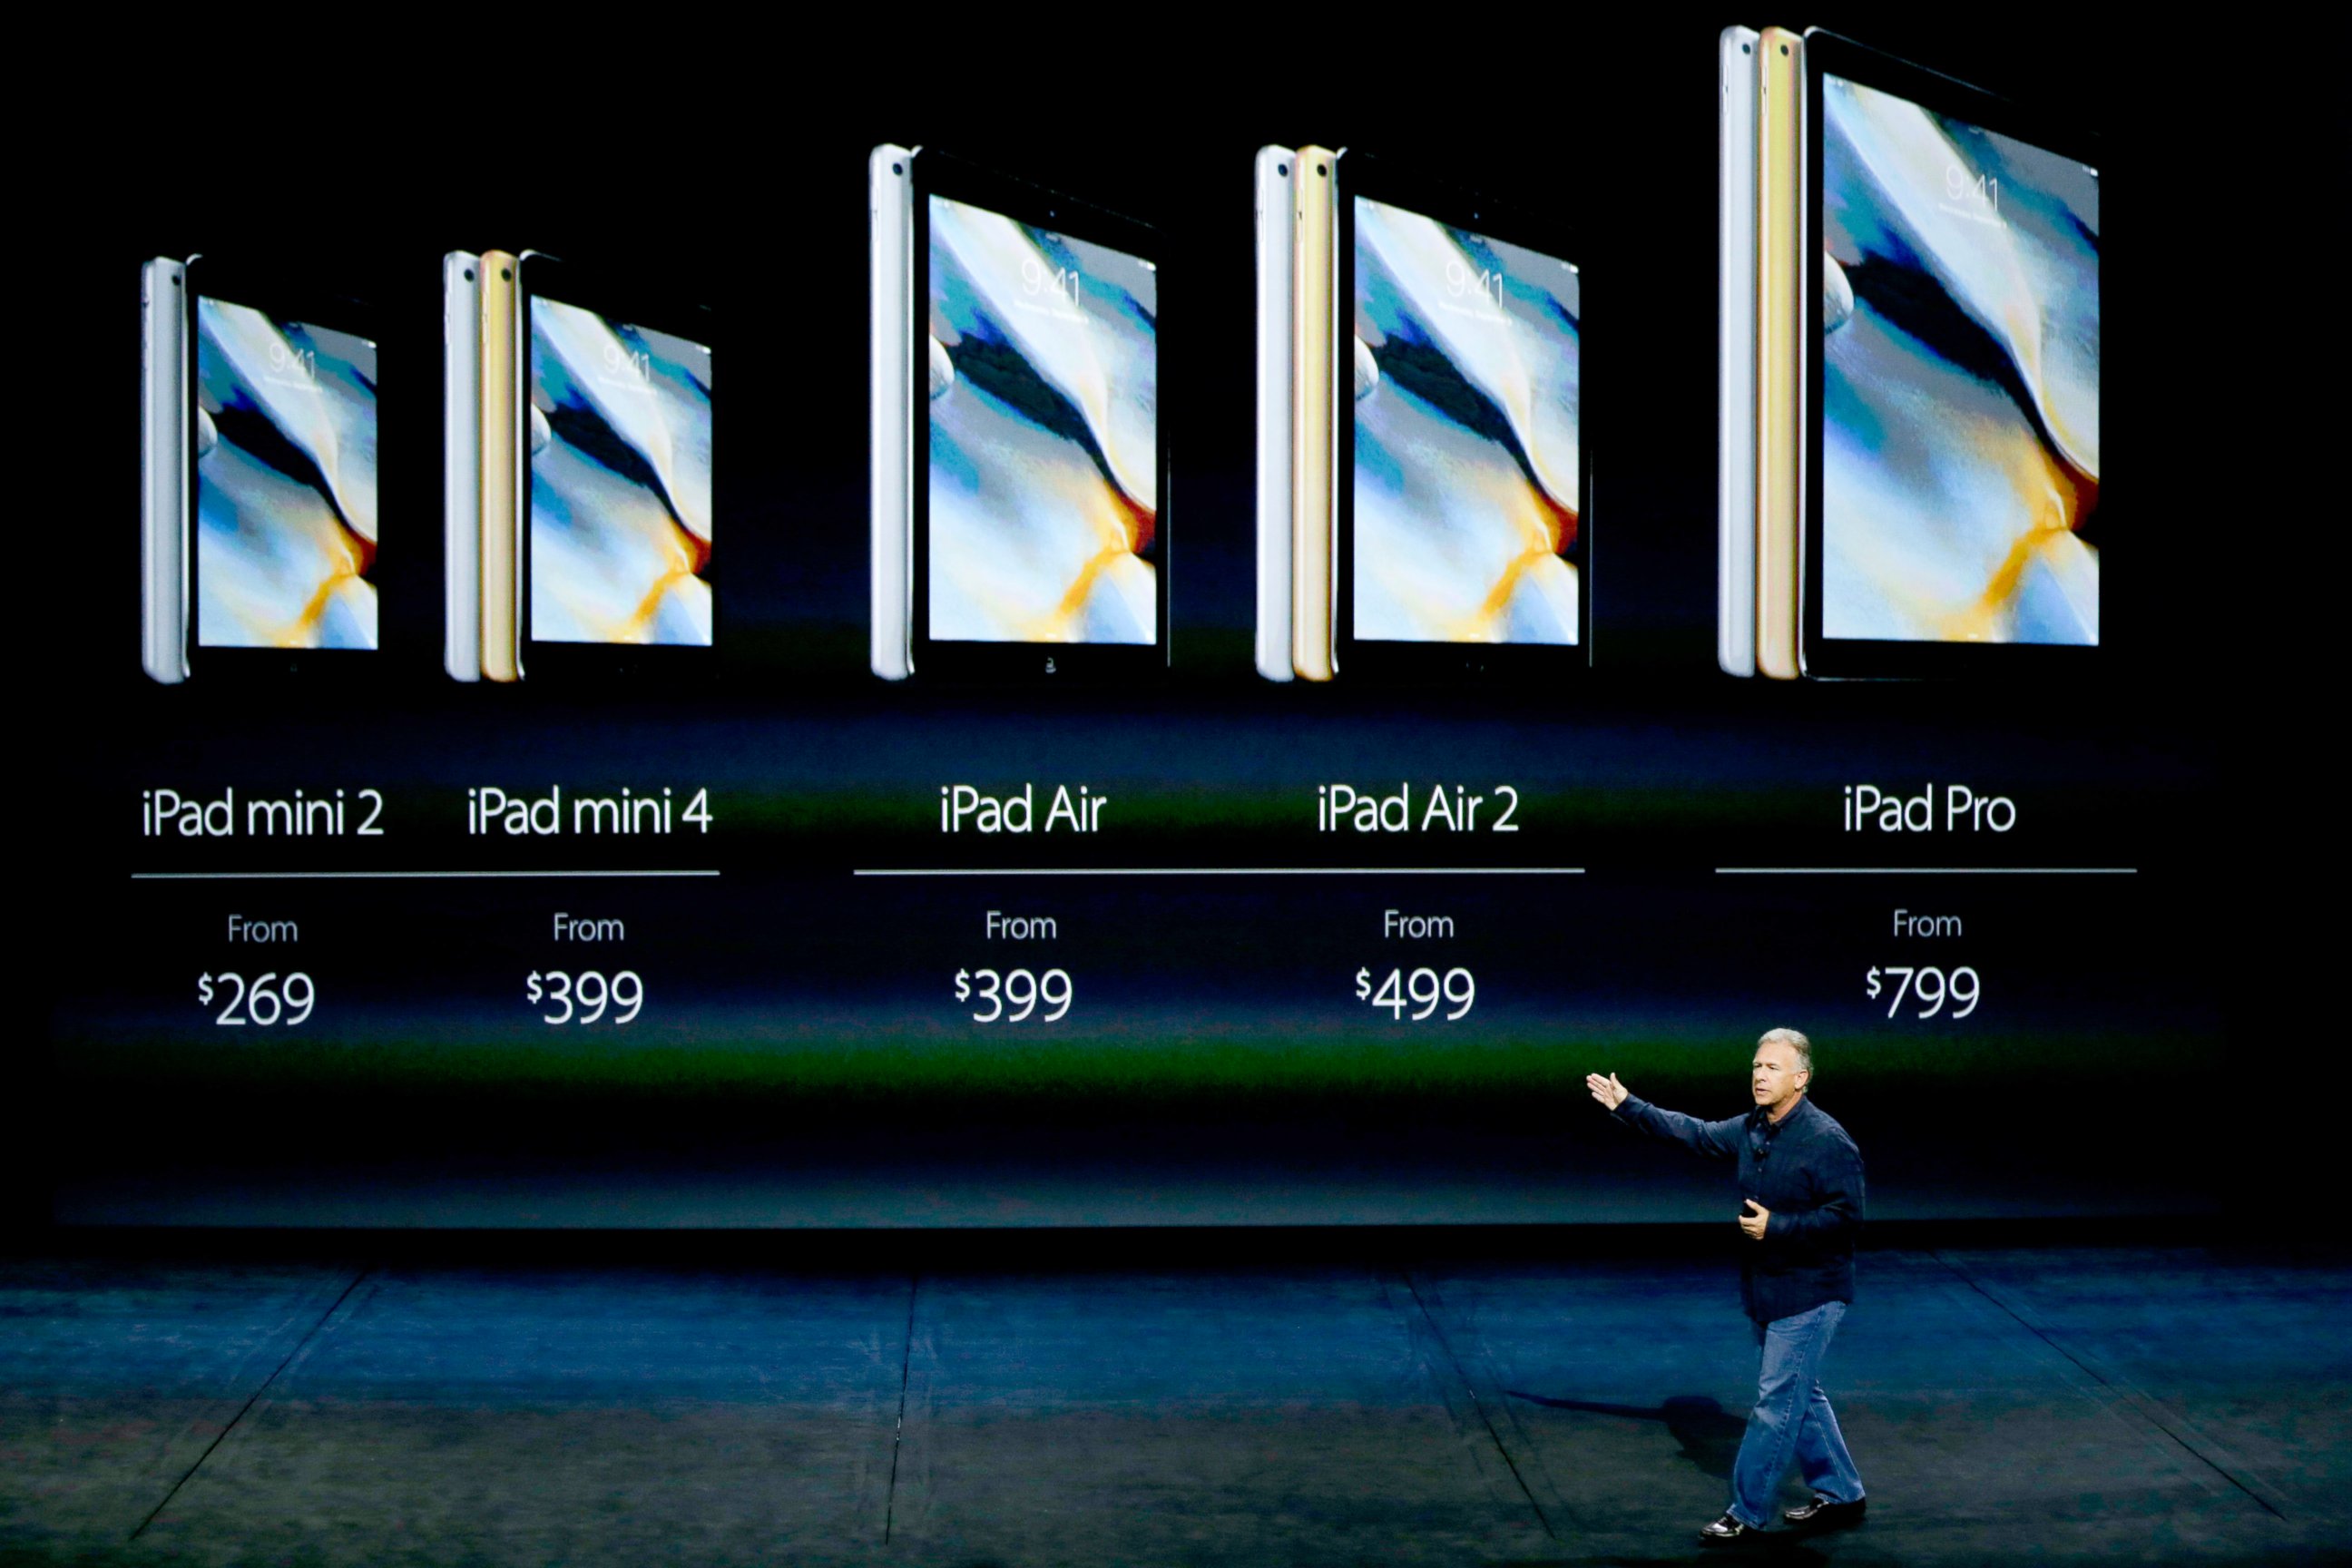 PHOTO: Phil Schiller, Apple's senior vice president of worldwide marketing, discusses the pricing for the iPad lineup during the Apple event at the Bill Graham Civic Auditorium in San Francisco, Sept. 9, 2015. 